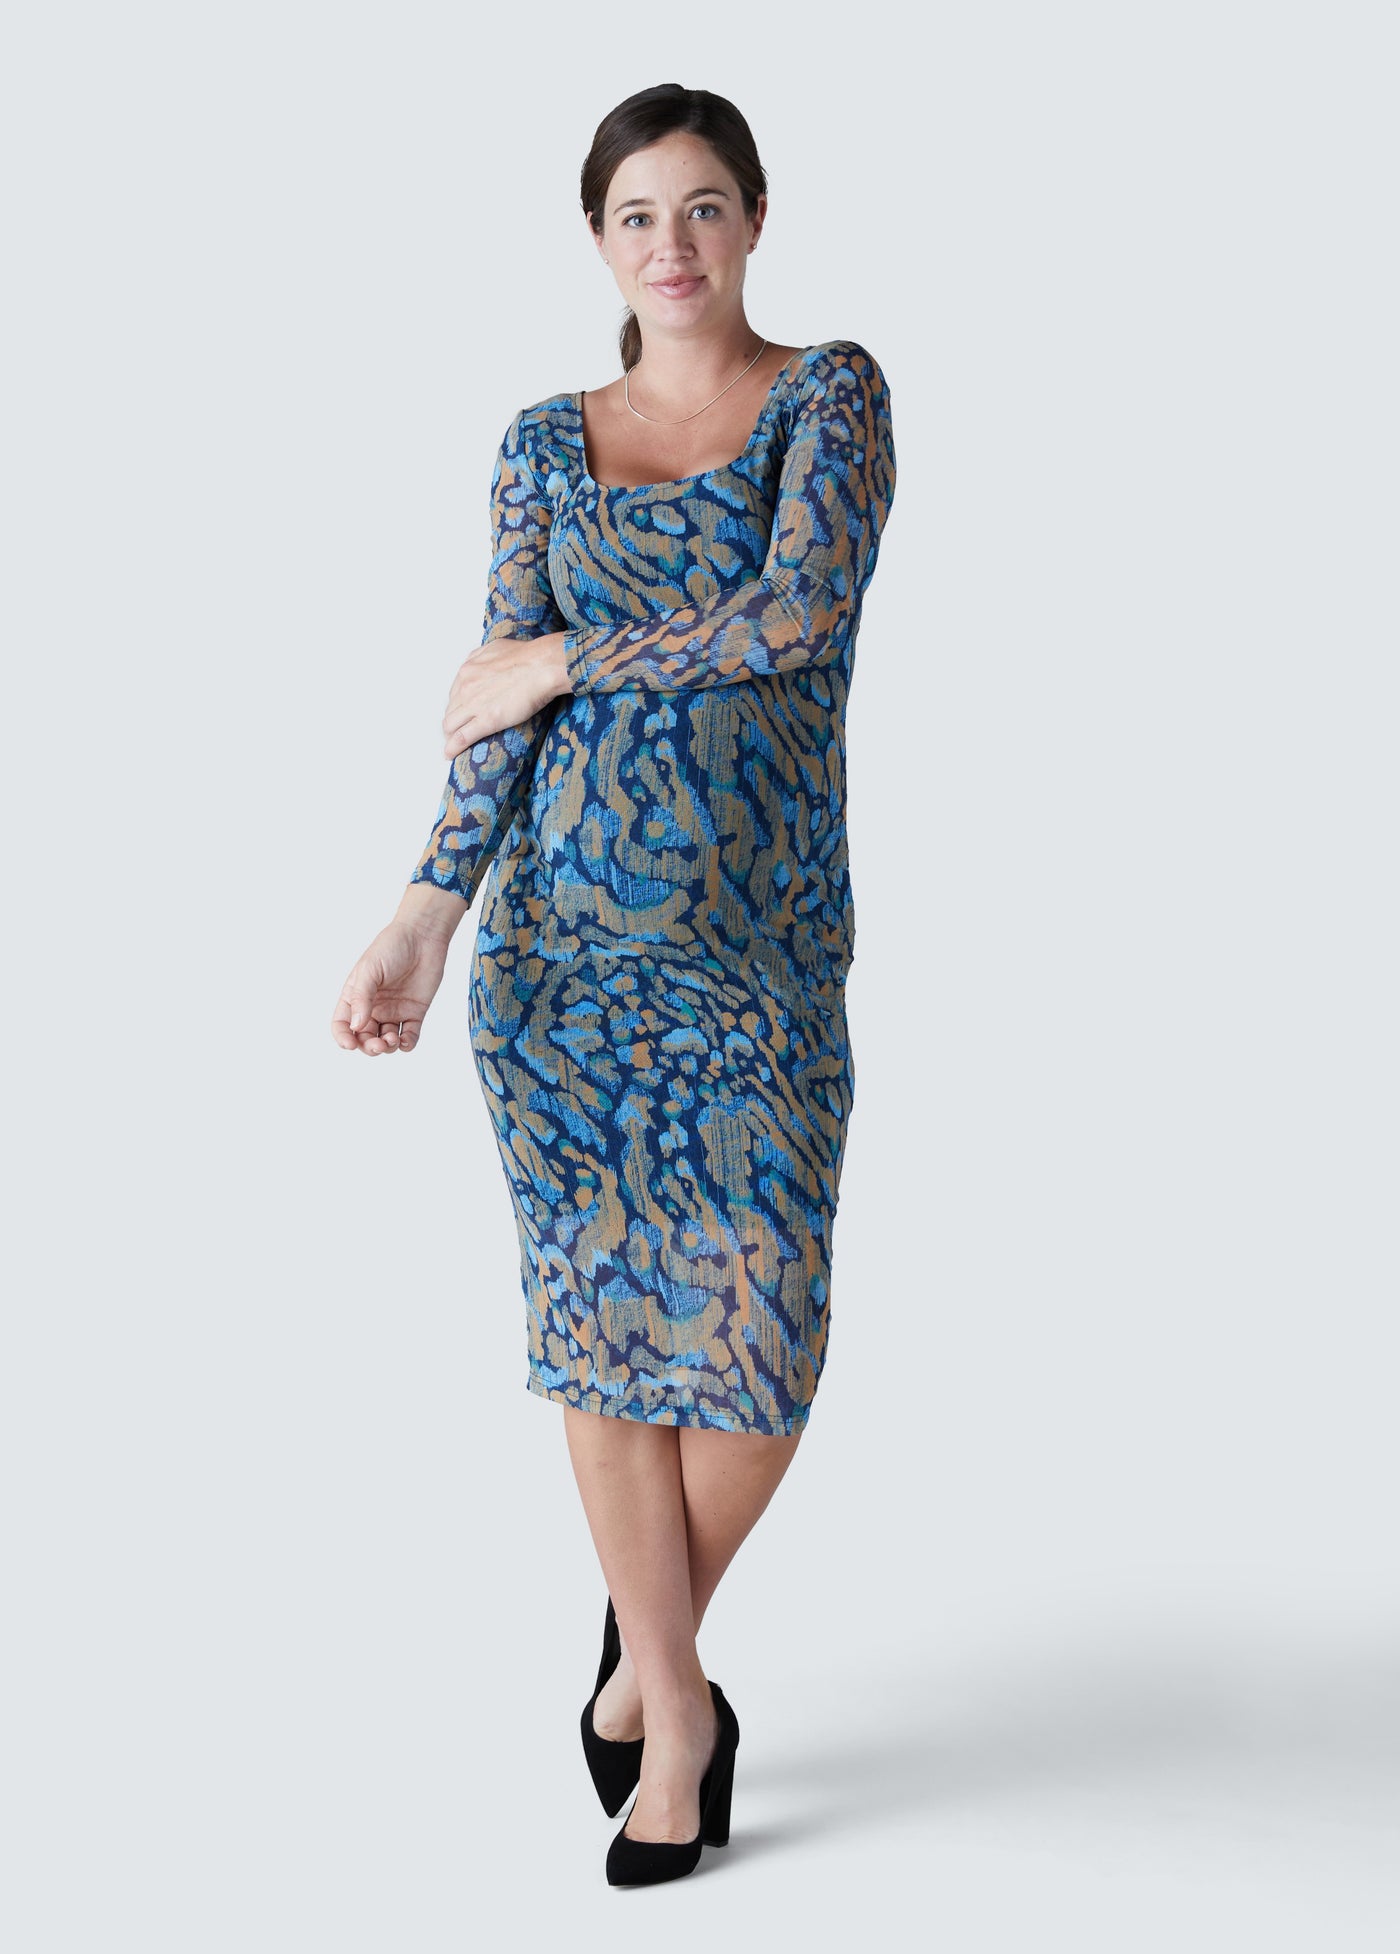 Iris Maternity Dress by soon maternity for $30